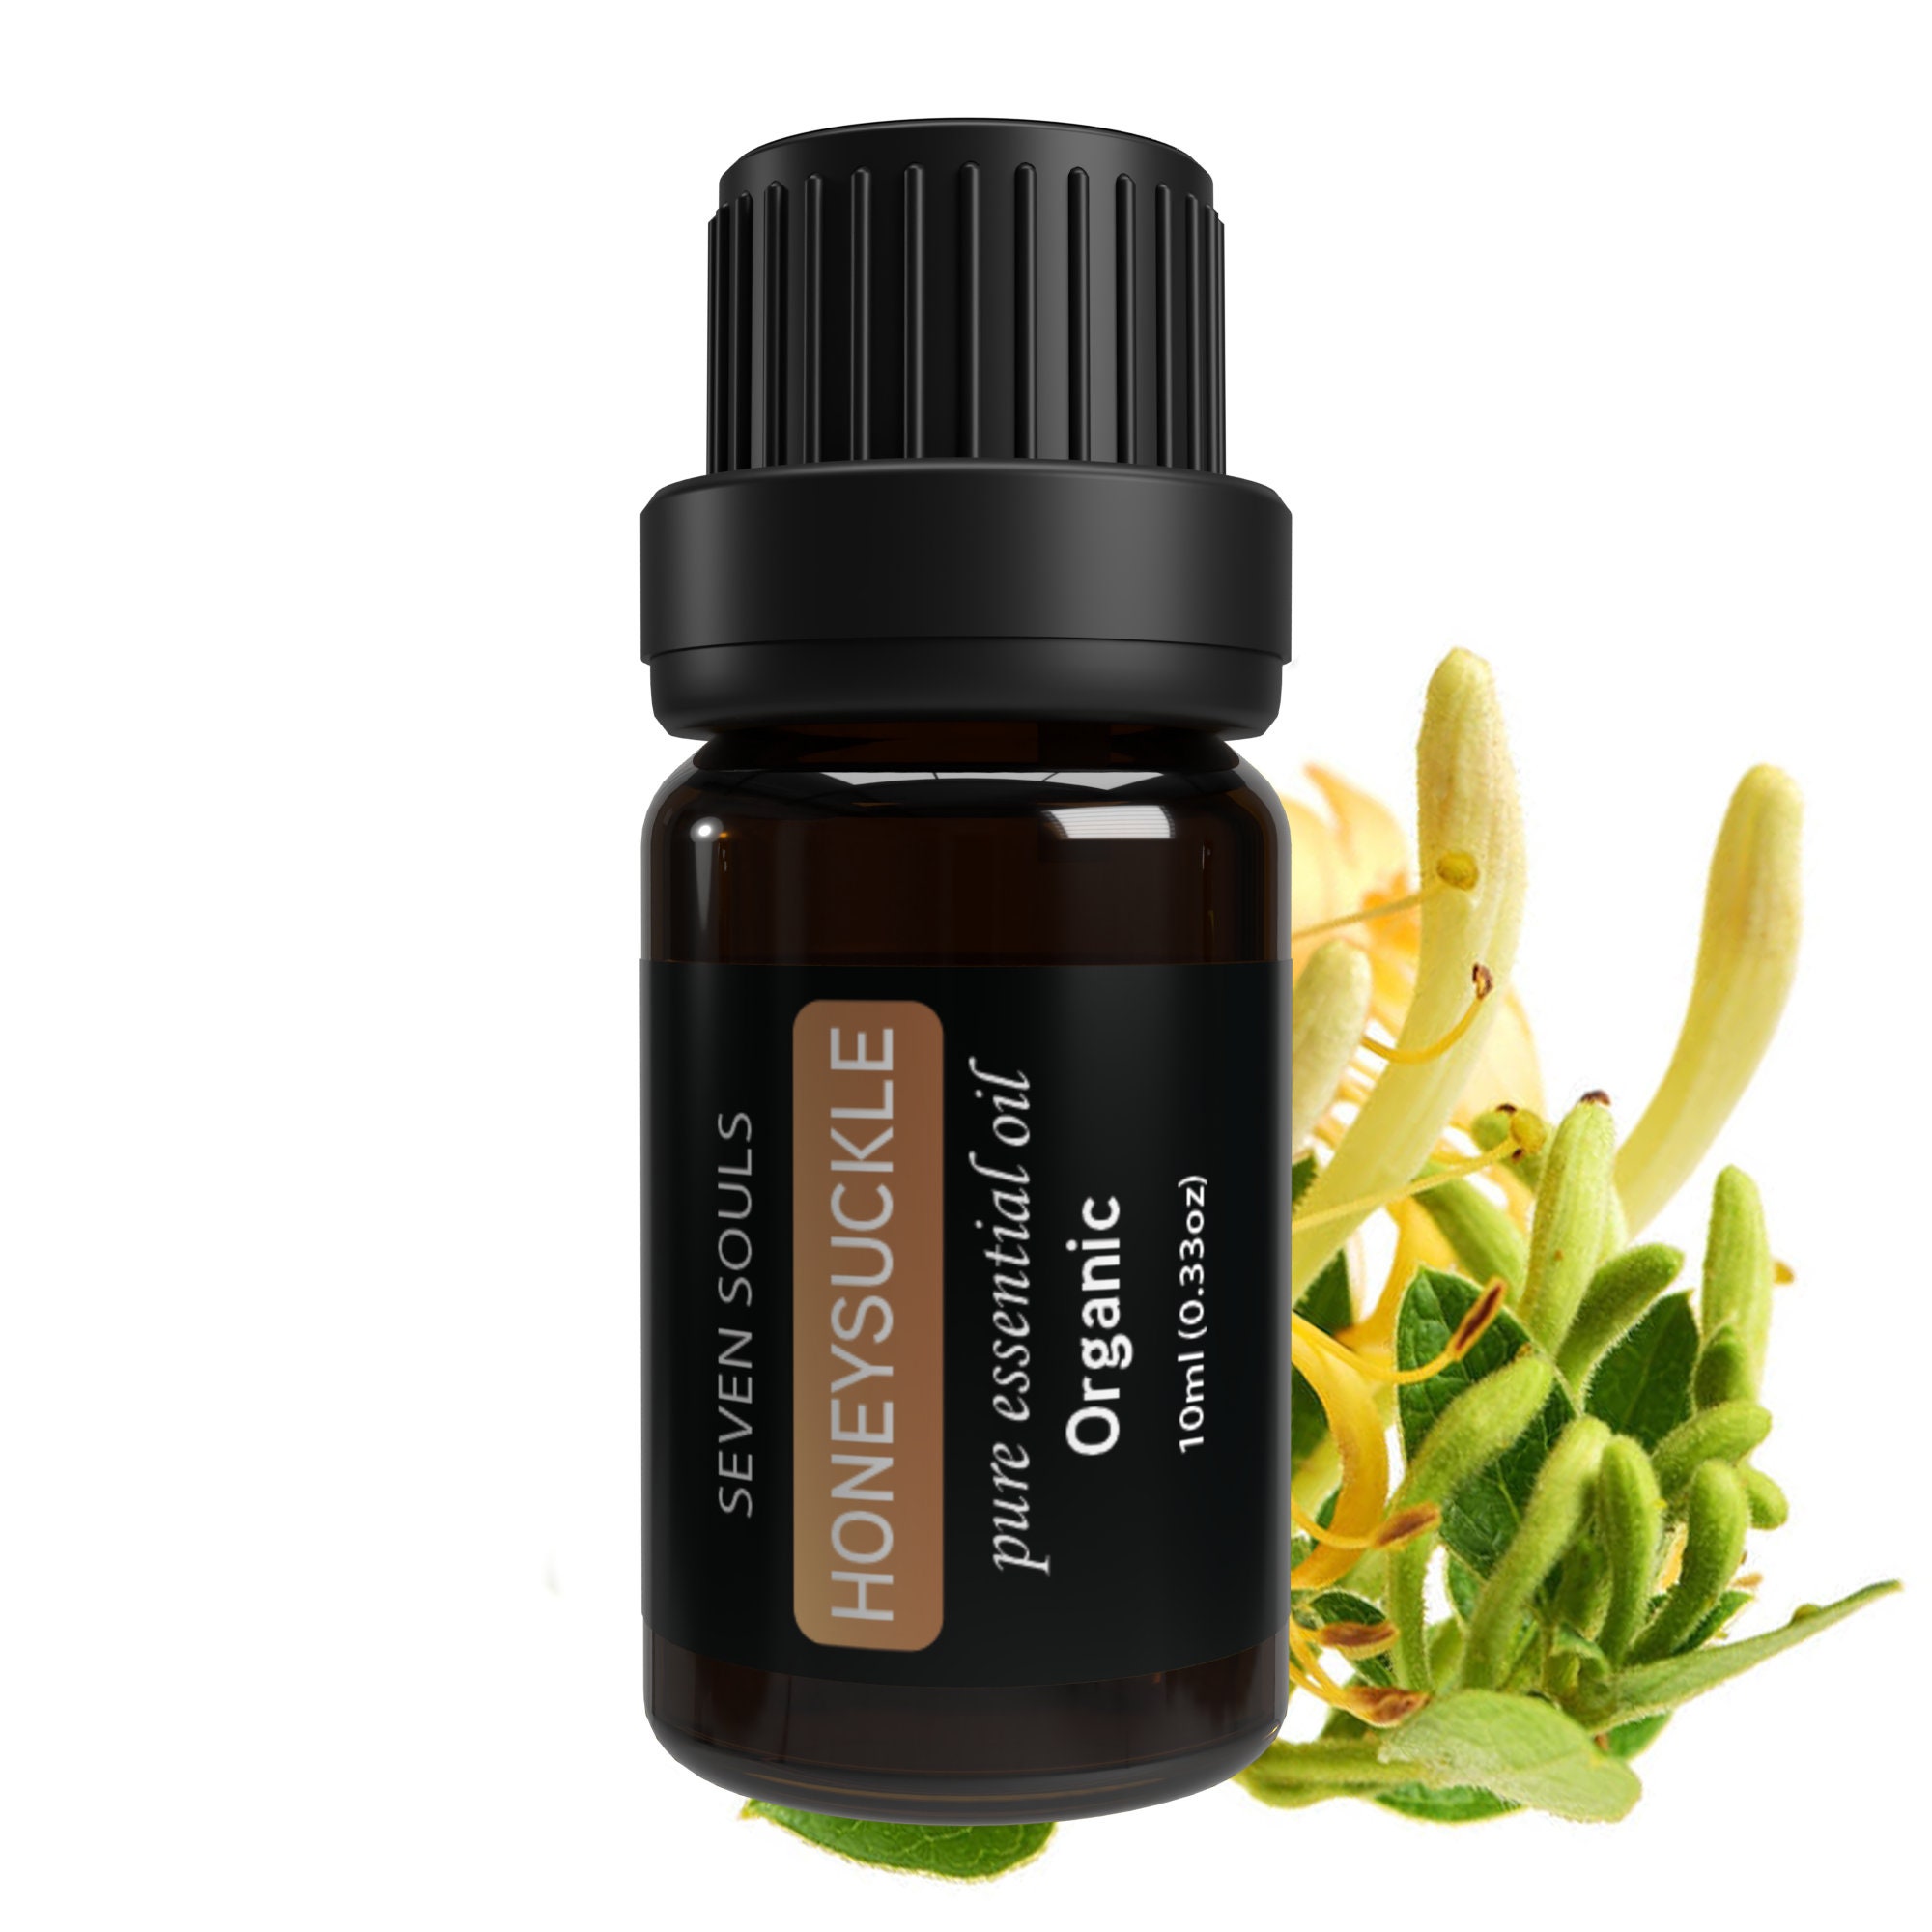 Yethious Honeysuckle Essential Oil 100% Pure, Undiluted, Natural